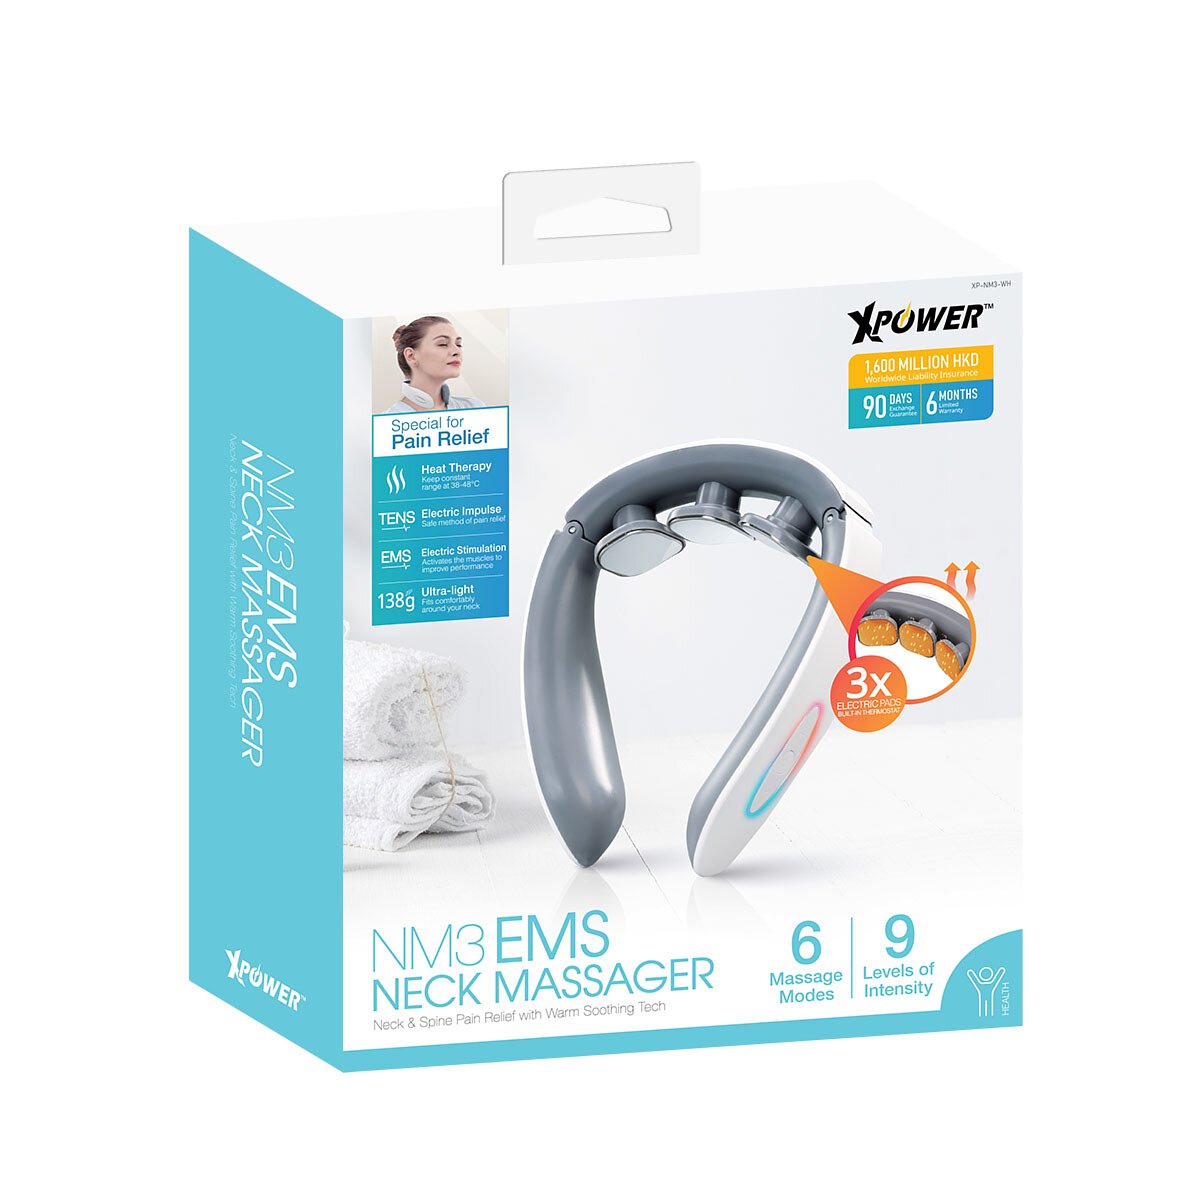 XPower NM3 EMS Neck Massager - Storming Gravity